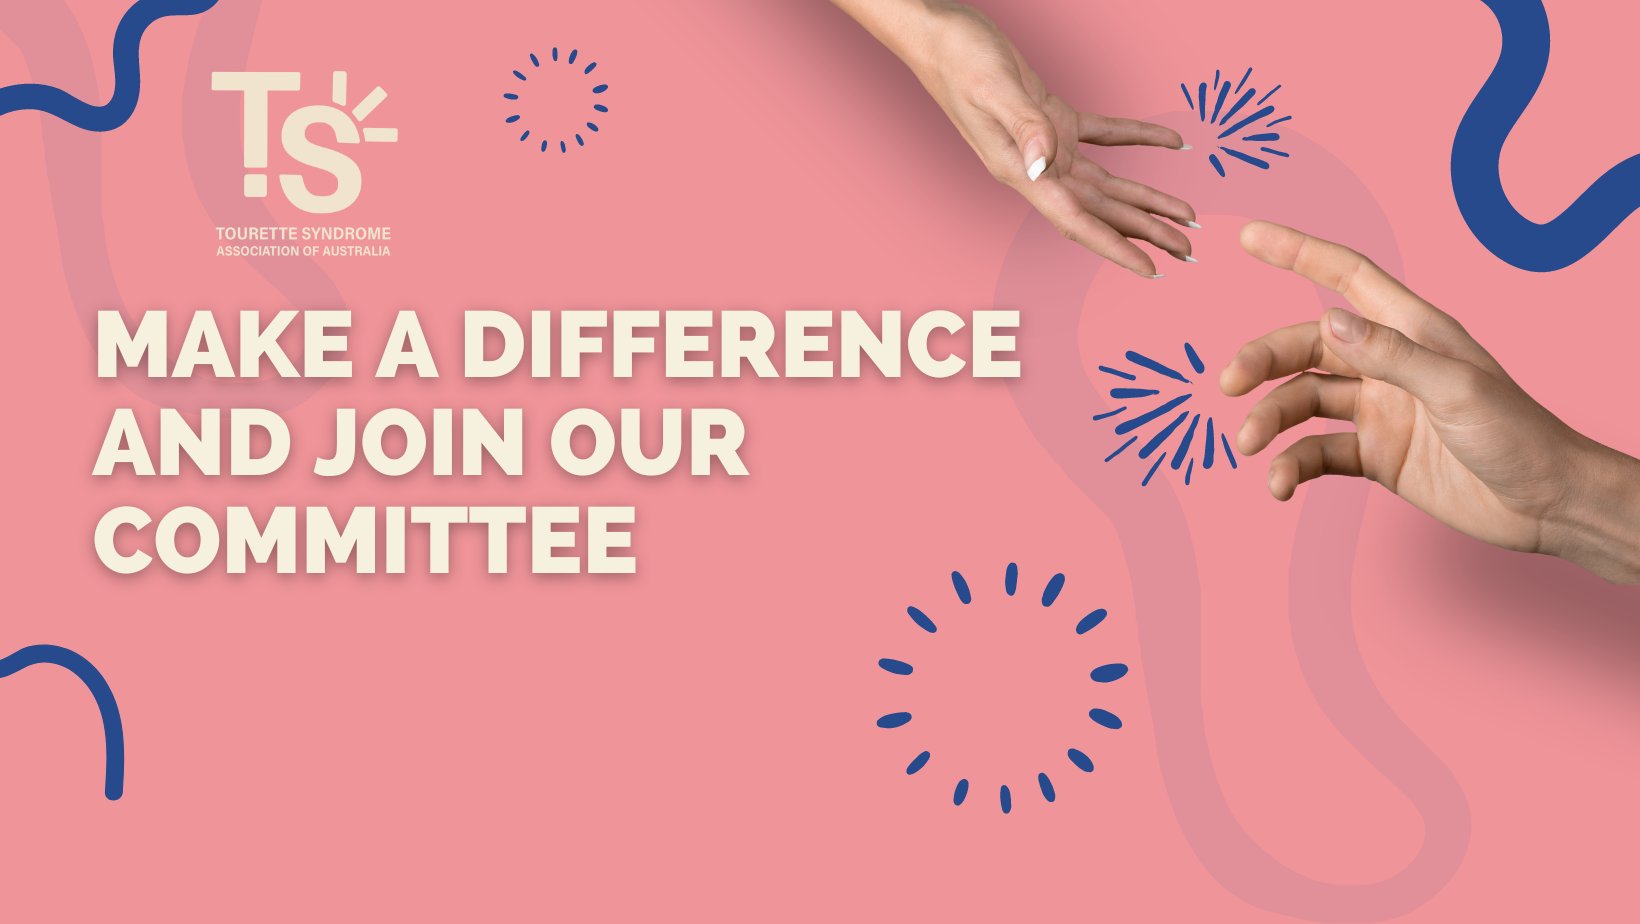 An image of two hands reaching towards each other with the TSAA logo and the words "Make a difference and join our committee"